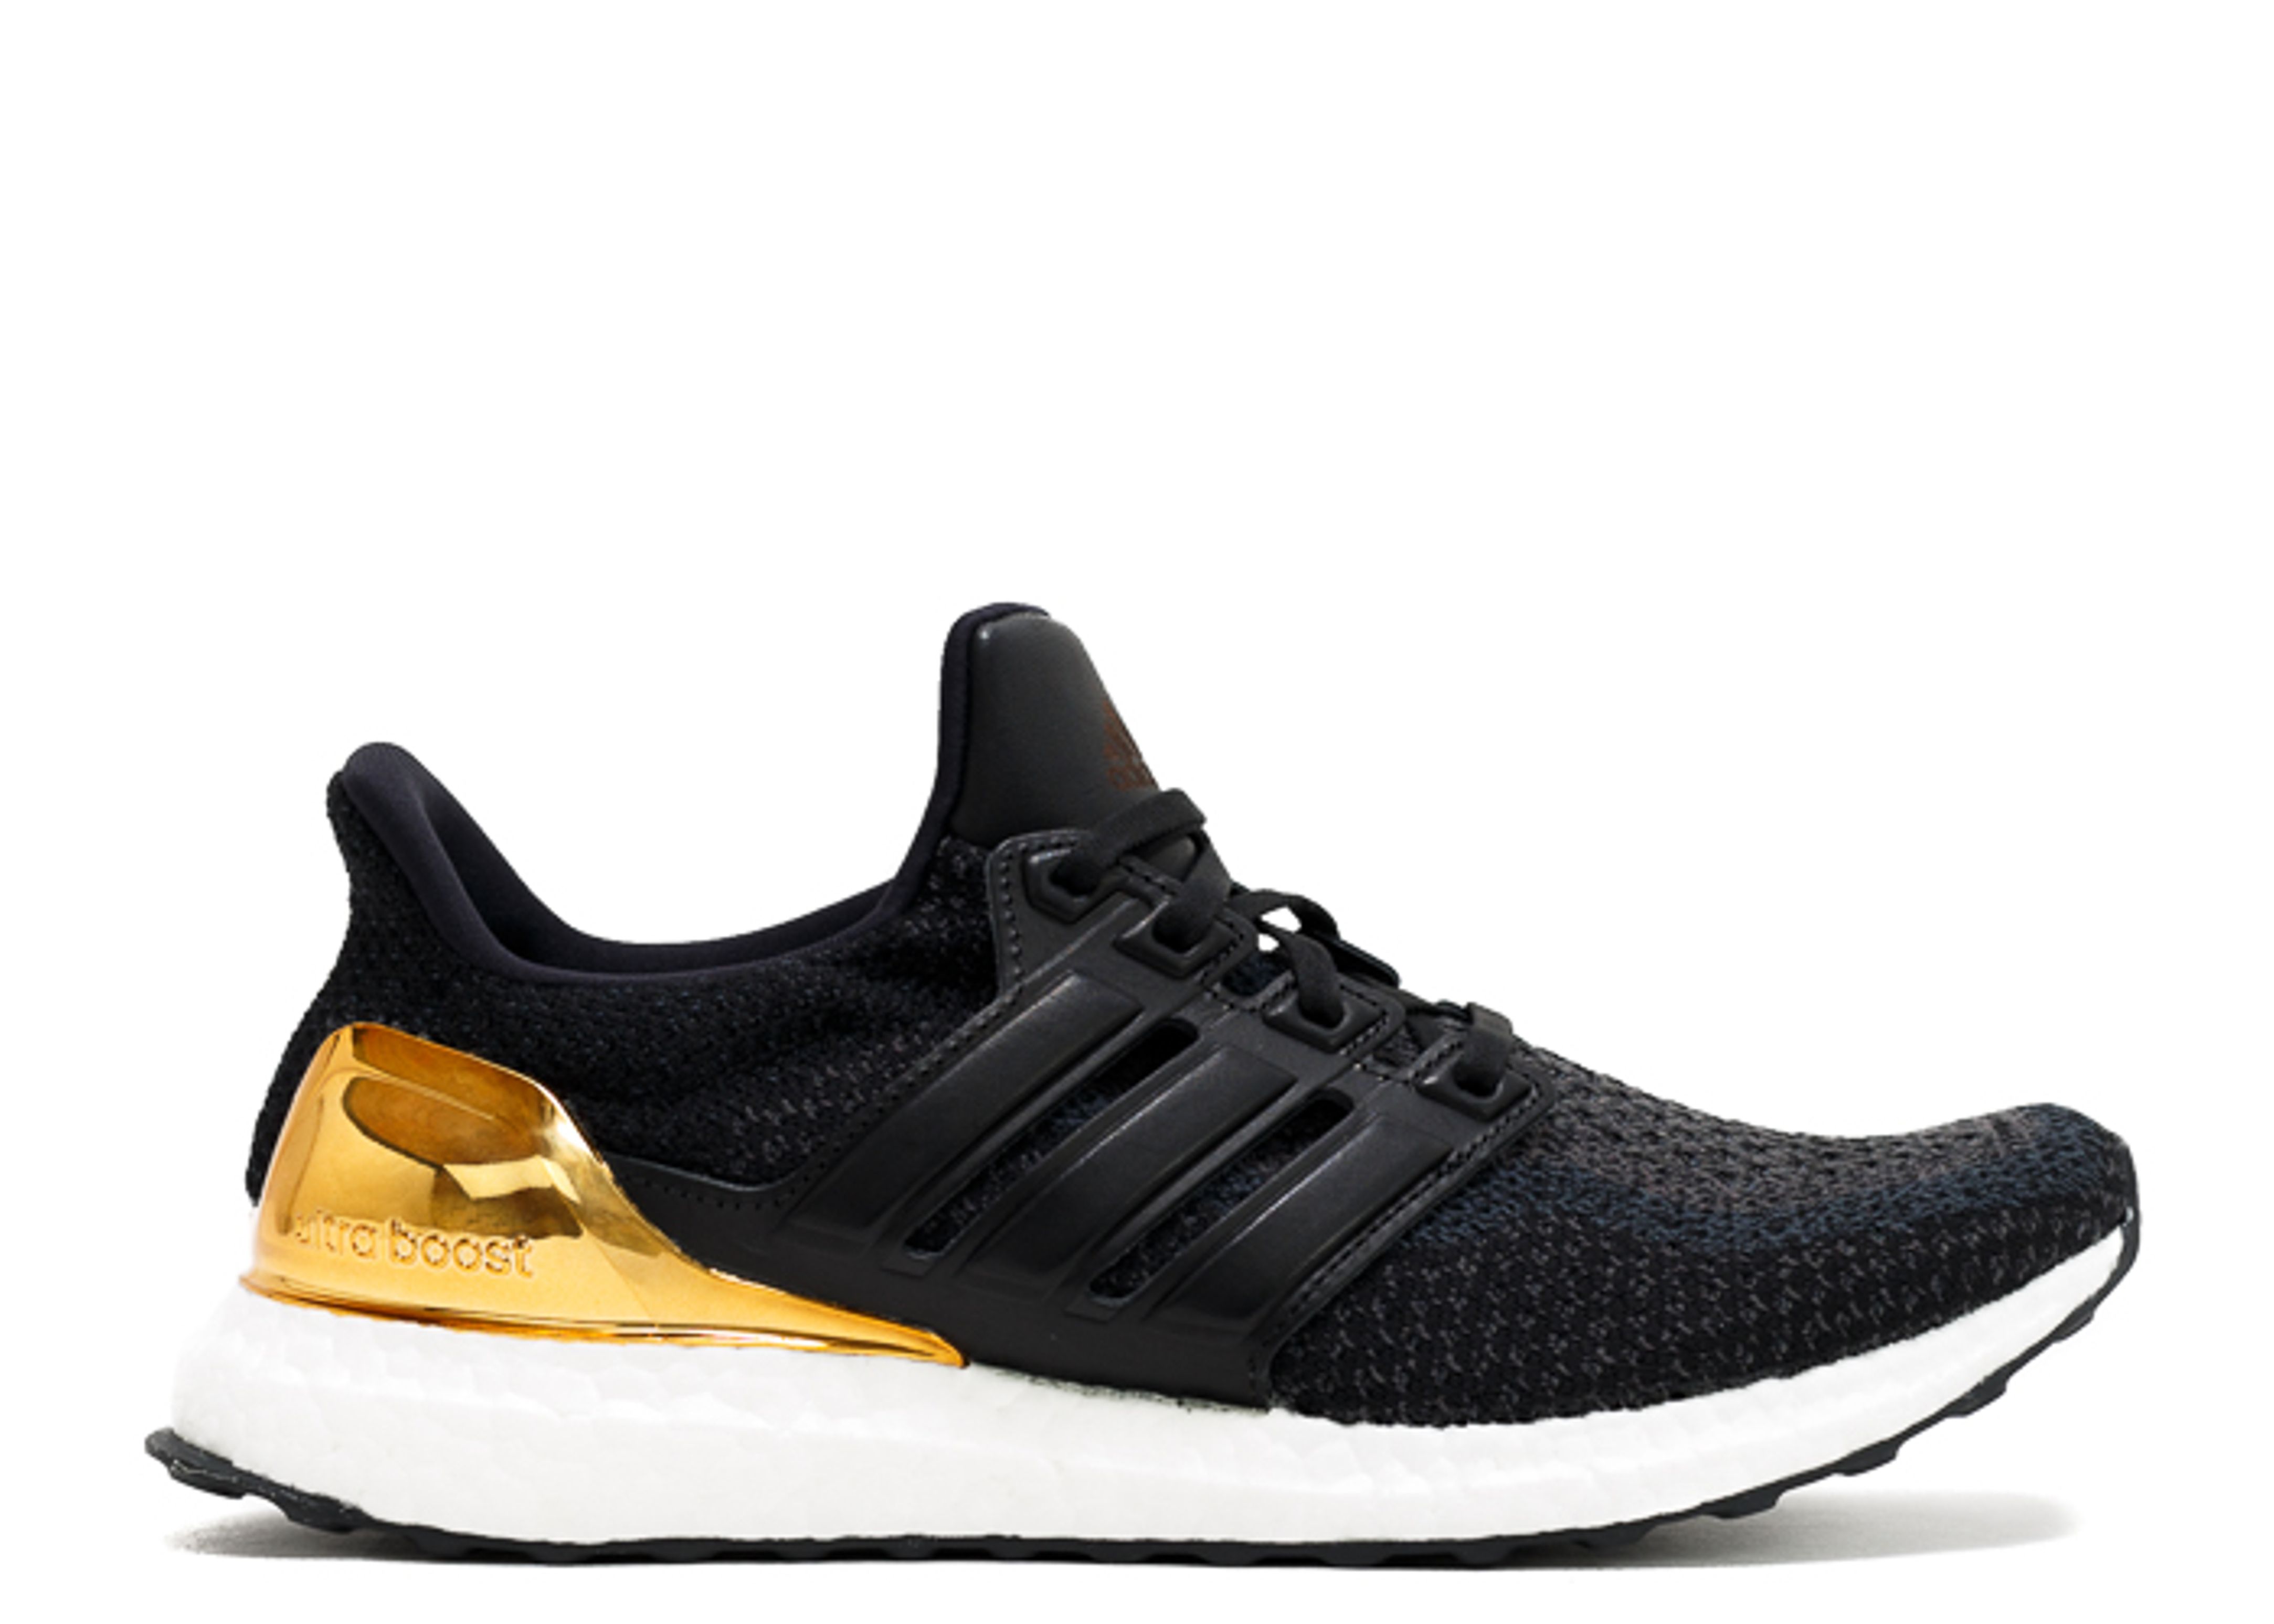 Кроссовки adidas Ultraboost 2.0 Limited 'Gold Medal', черный medal throwing the ball sports competition metal medal gold foil medal gold and silver bronze school factory sports medal 2021